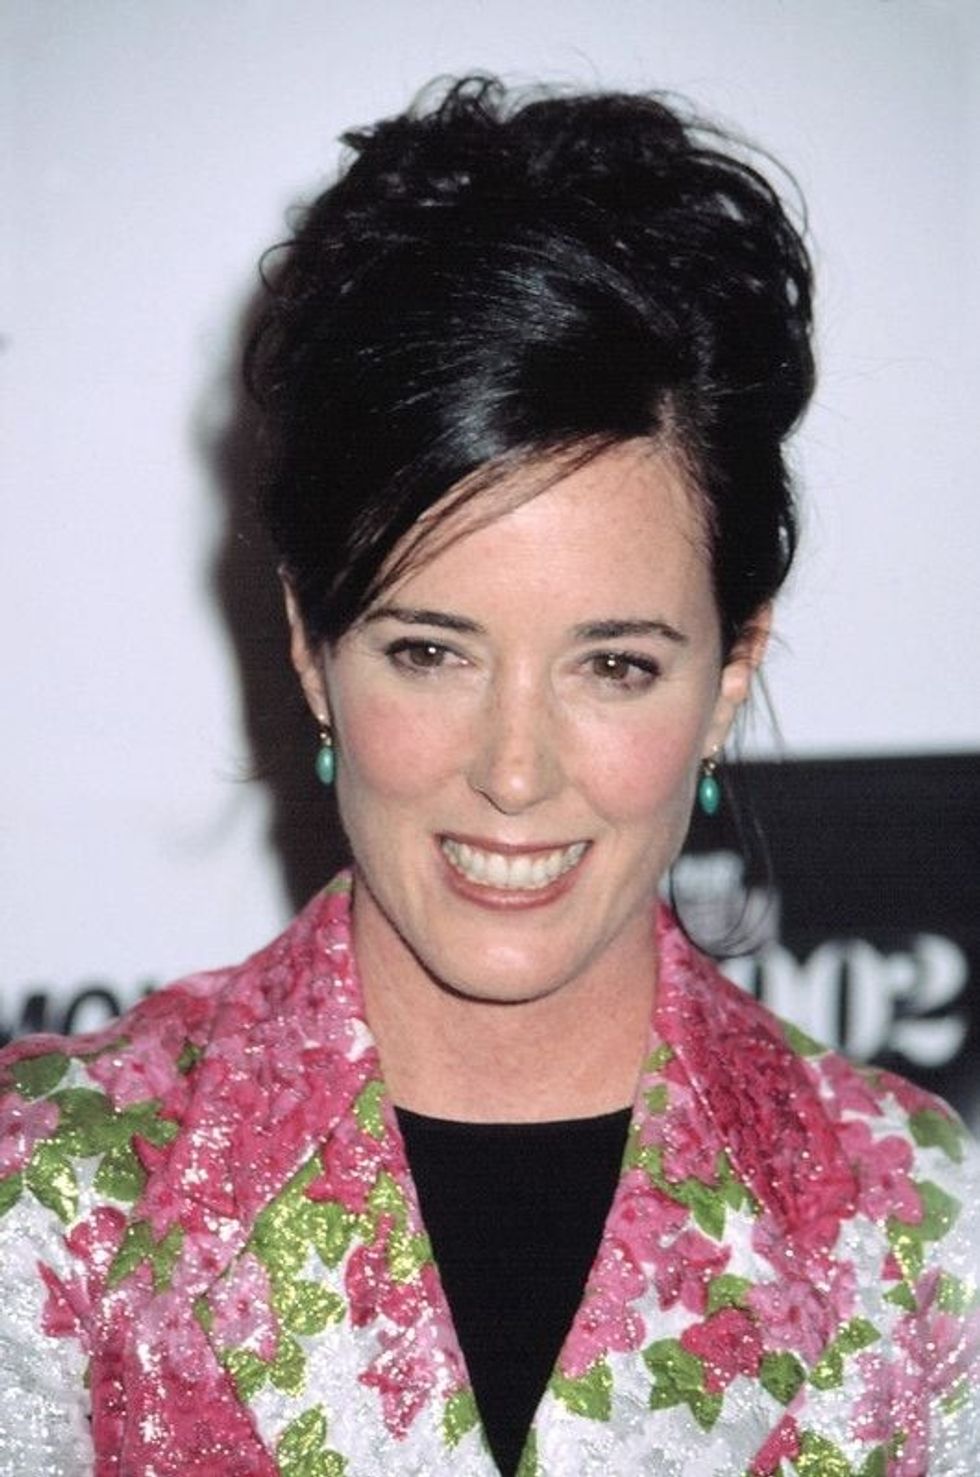 Kate Spade in a floral dress